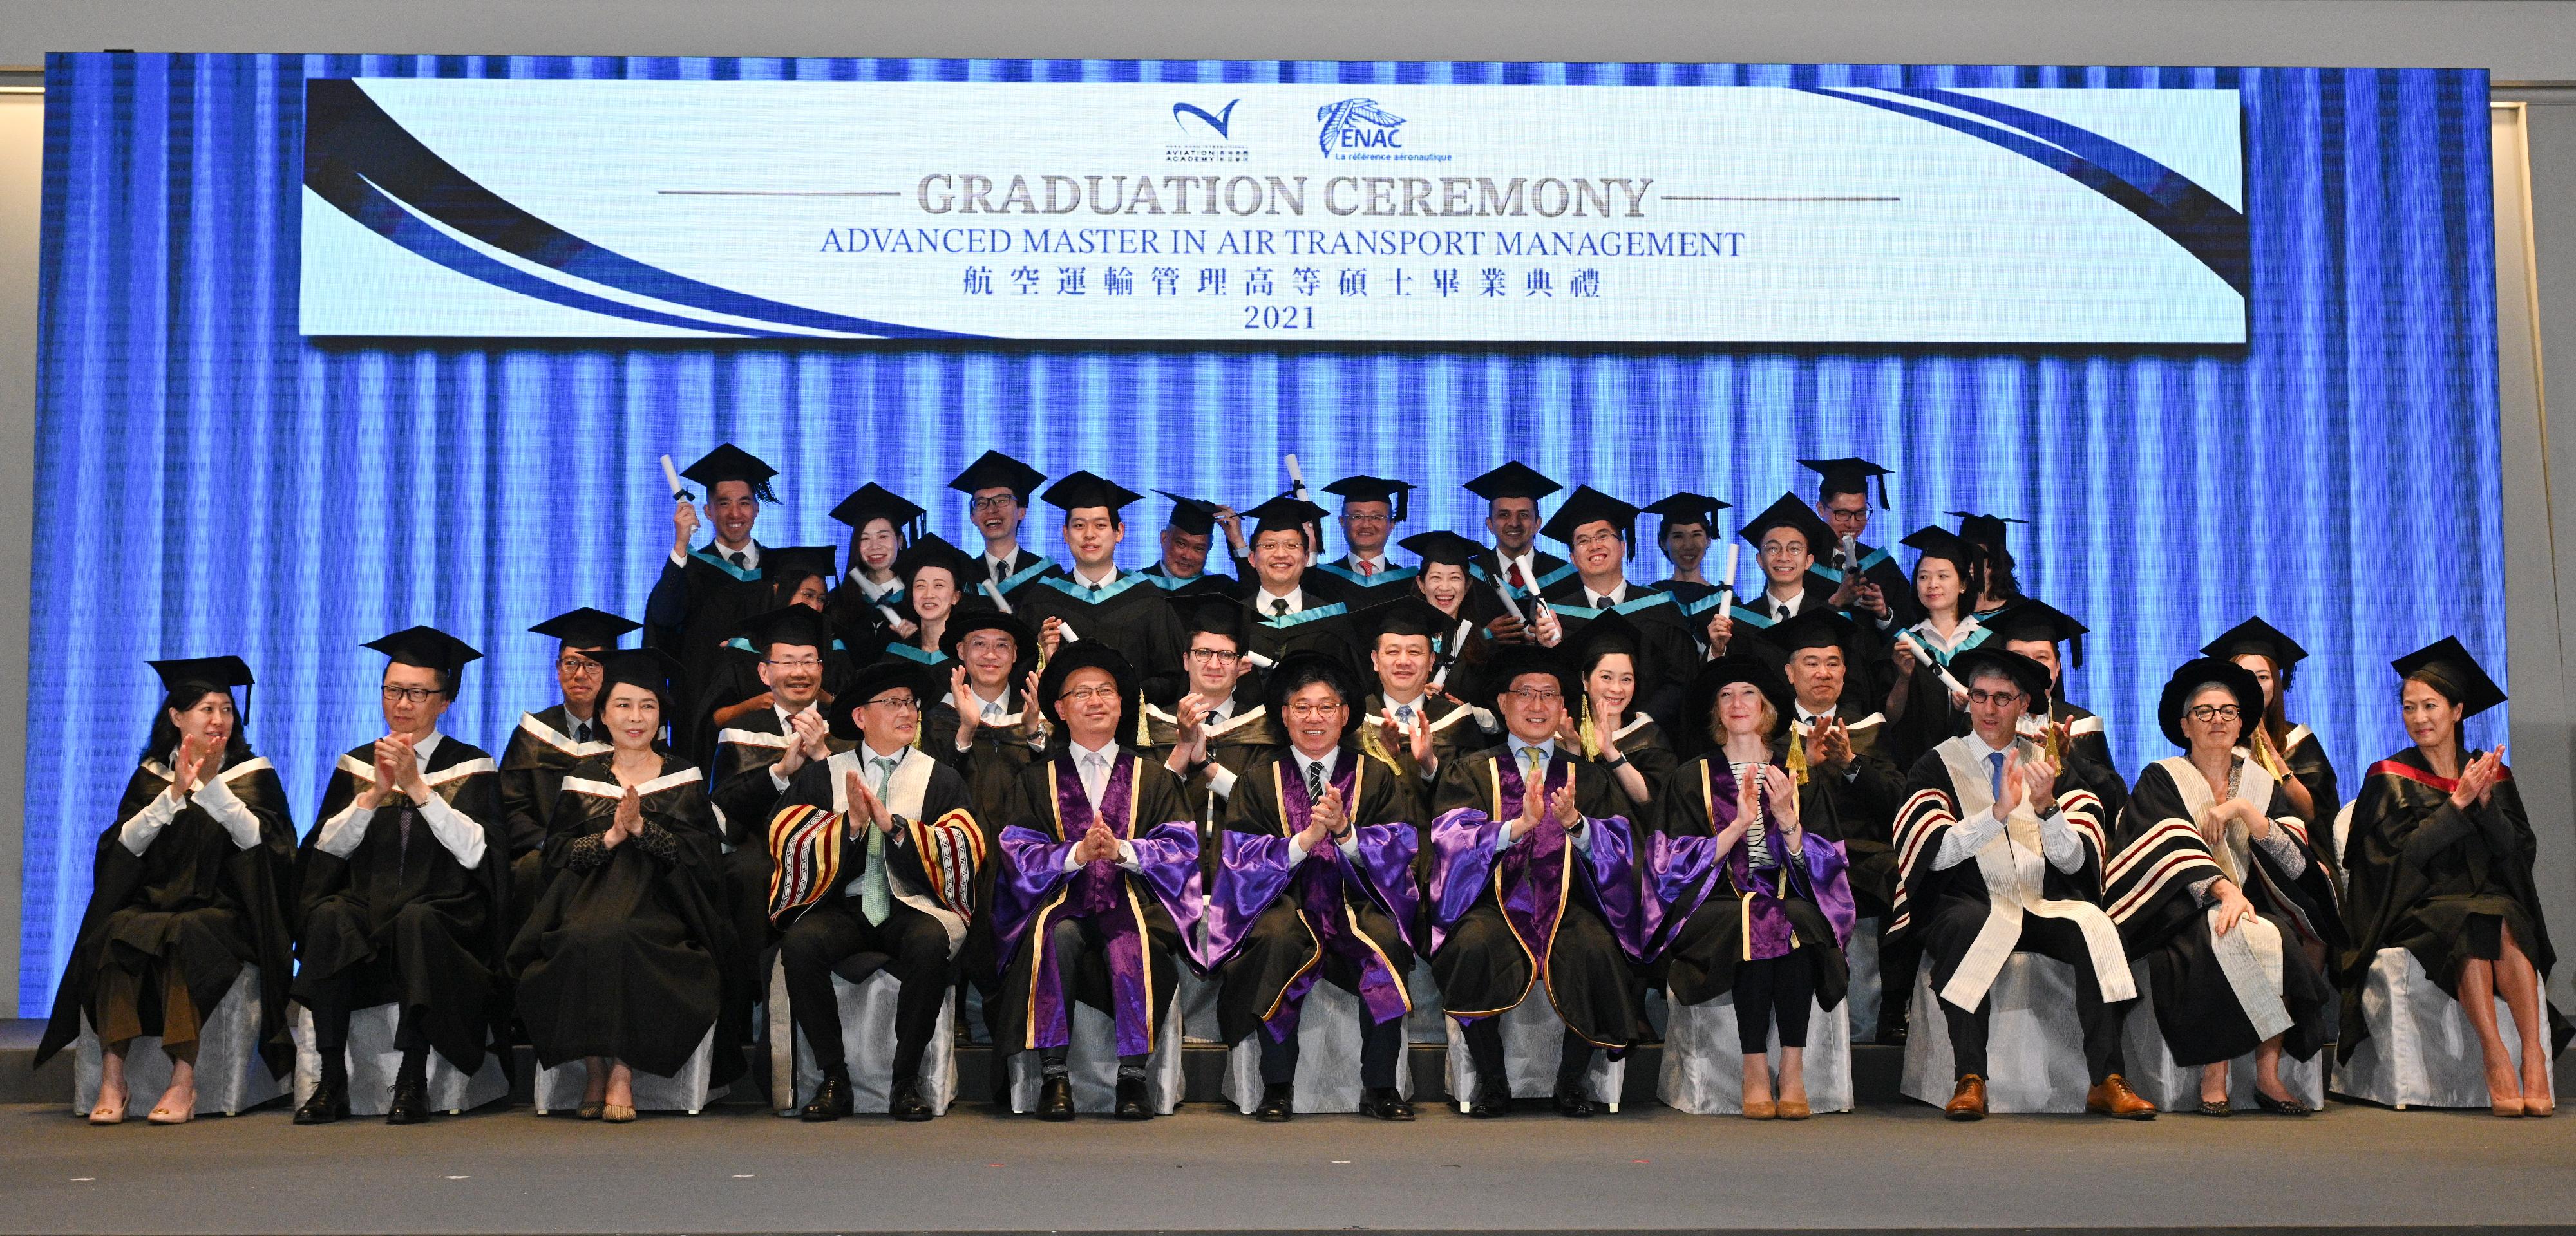 The Secretary for Transport and Logistics, Mr Lam Sai-hung (centre, front row), today (March 10) attended the Hong Kong International Aviation Academy's Graduation Ceremony for the 2021 Cohort of the Advanced Master Programme in Air Transport Management. Photo shows Mr Lam with other officiating guests and the graduates.